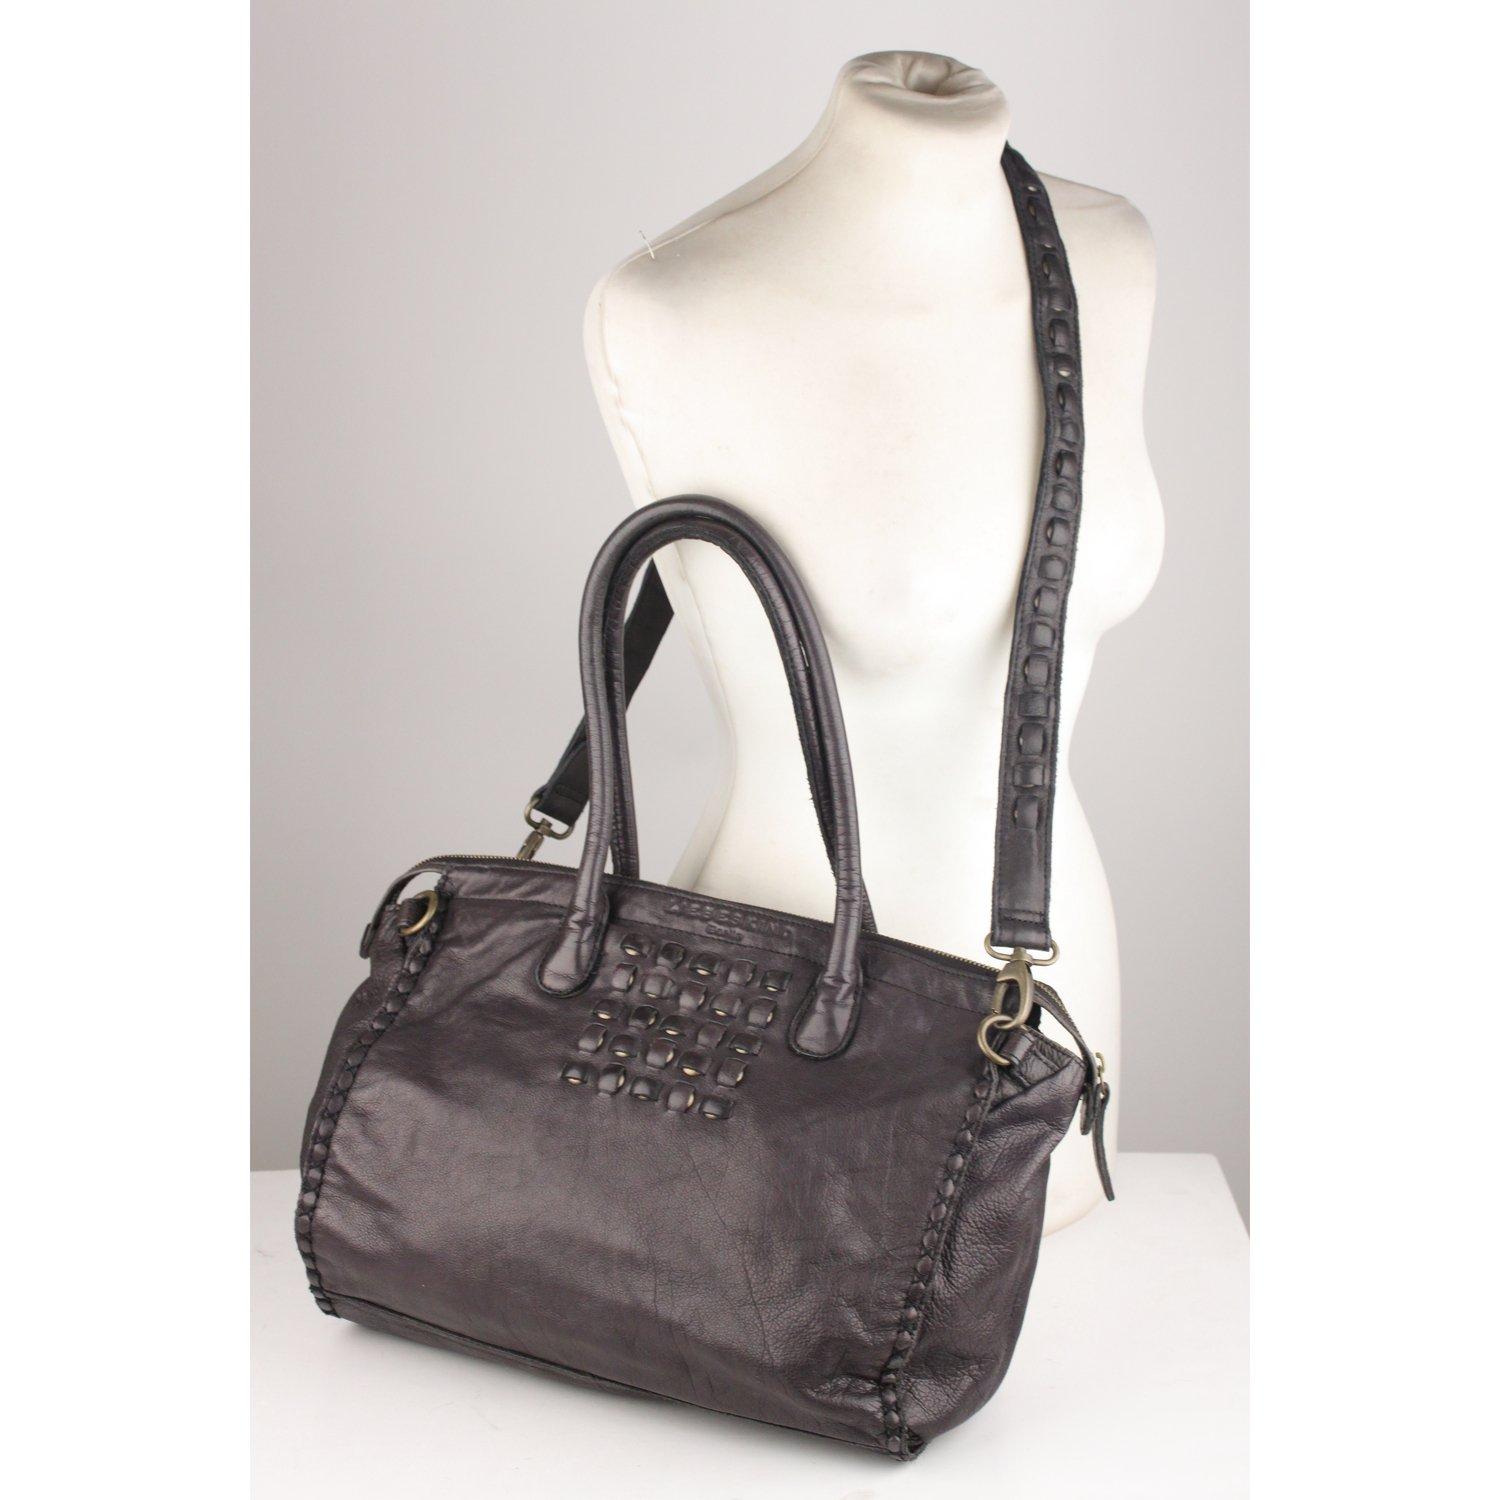 MATERIAL: Leather COLOR: Charcoal MODEL: Tote Bag GENDER: Women SIZE: Medium bags Condition CONDITION DETAILS: B :GOOD CONDITION - Some light wear of use - Some creases on leather due to normal use Measurements MEASUREMENTS: BAG HEIGHT: 10 inches -